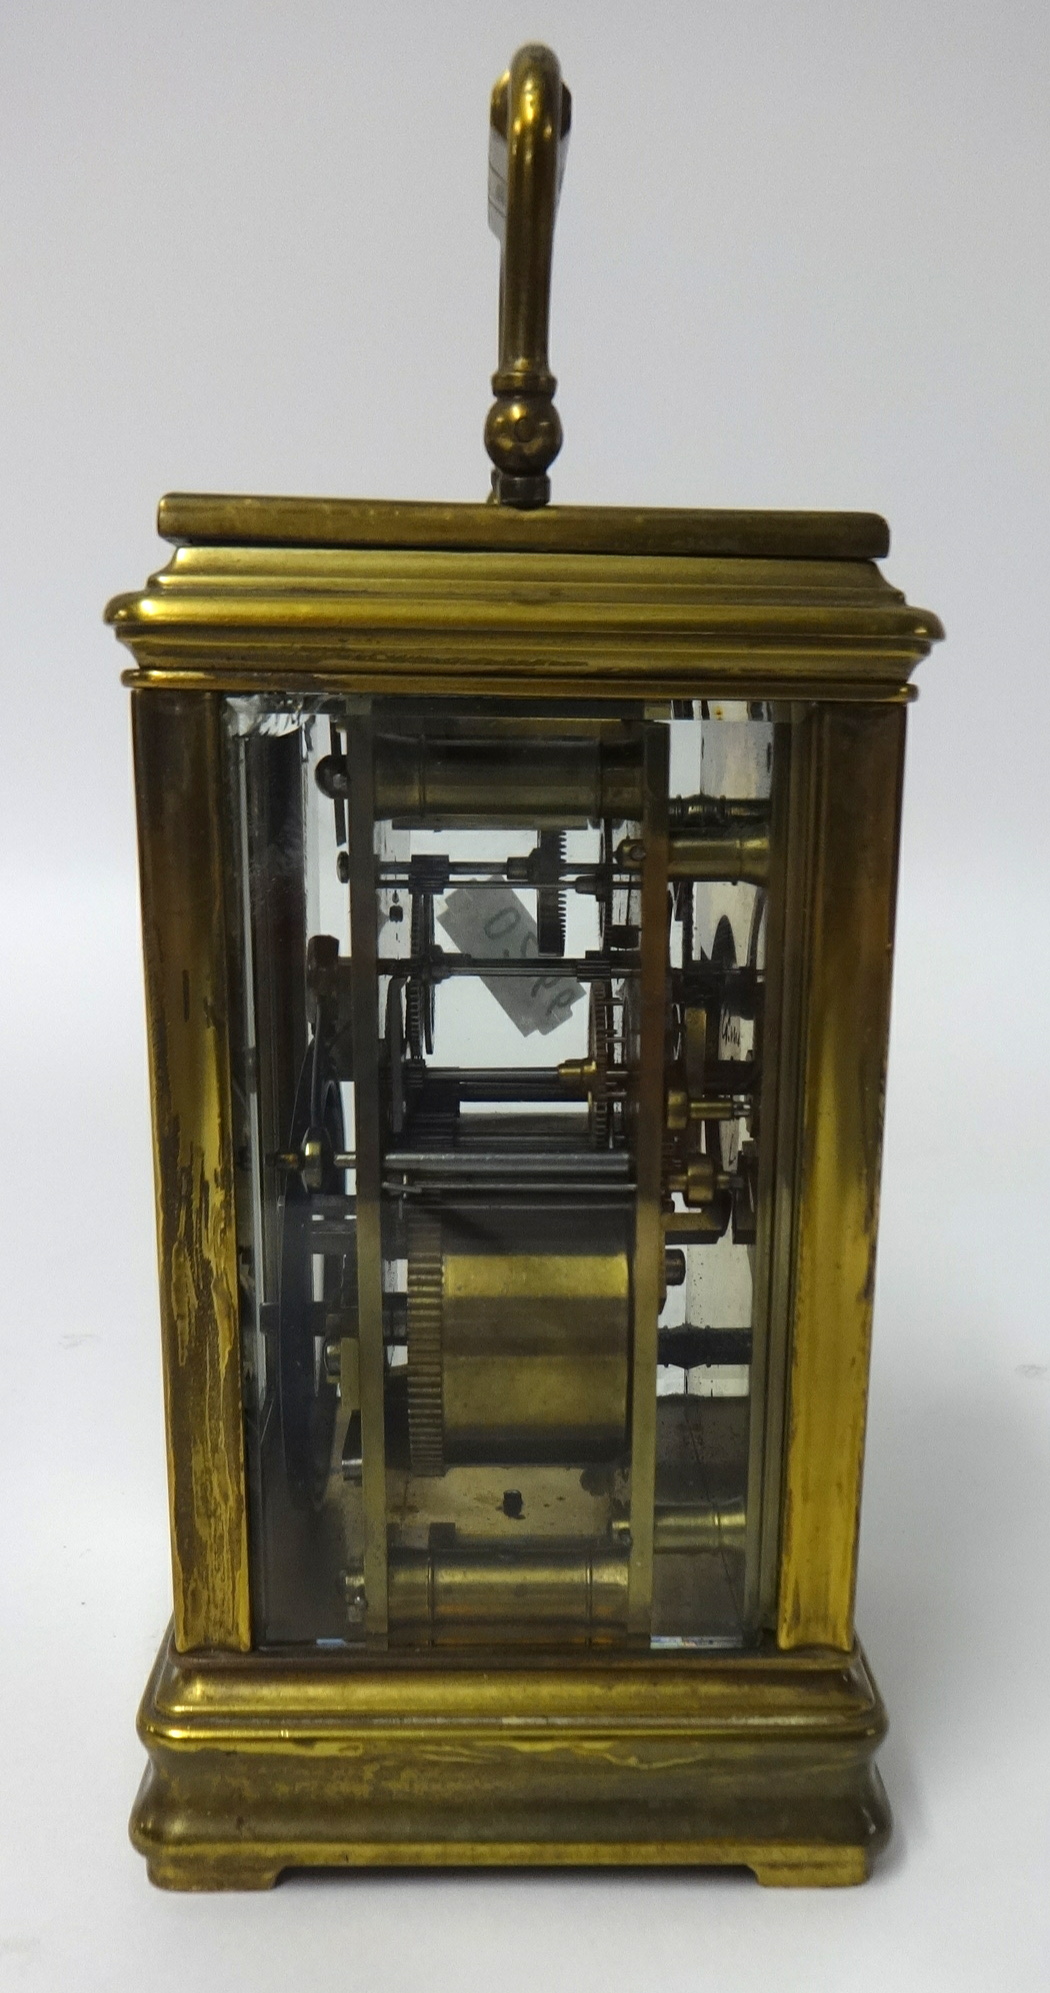 A carriage clock, C.H.Cornish, Plymouth. - Image 2 of 3